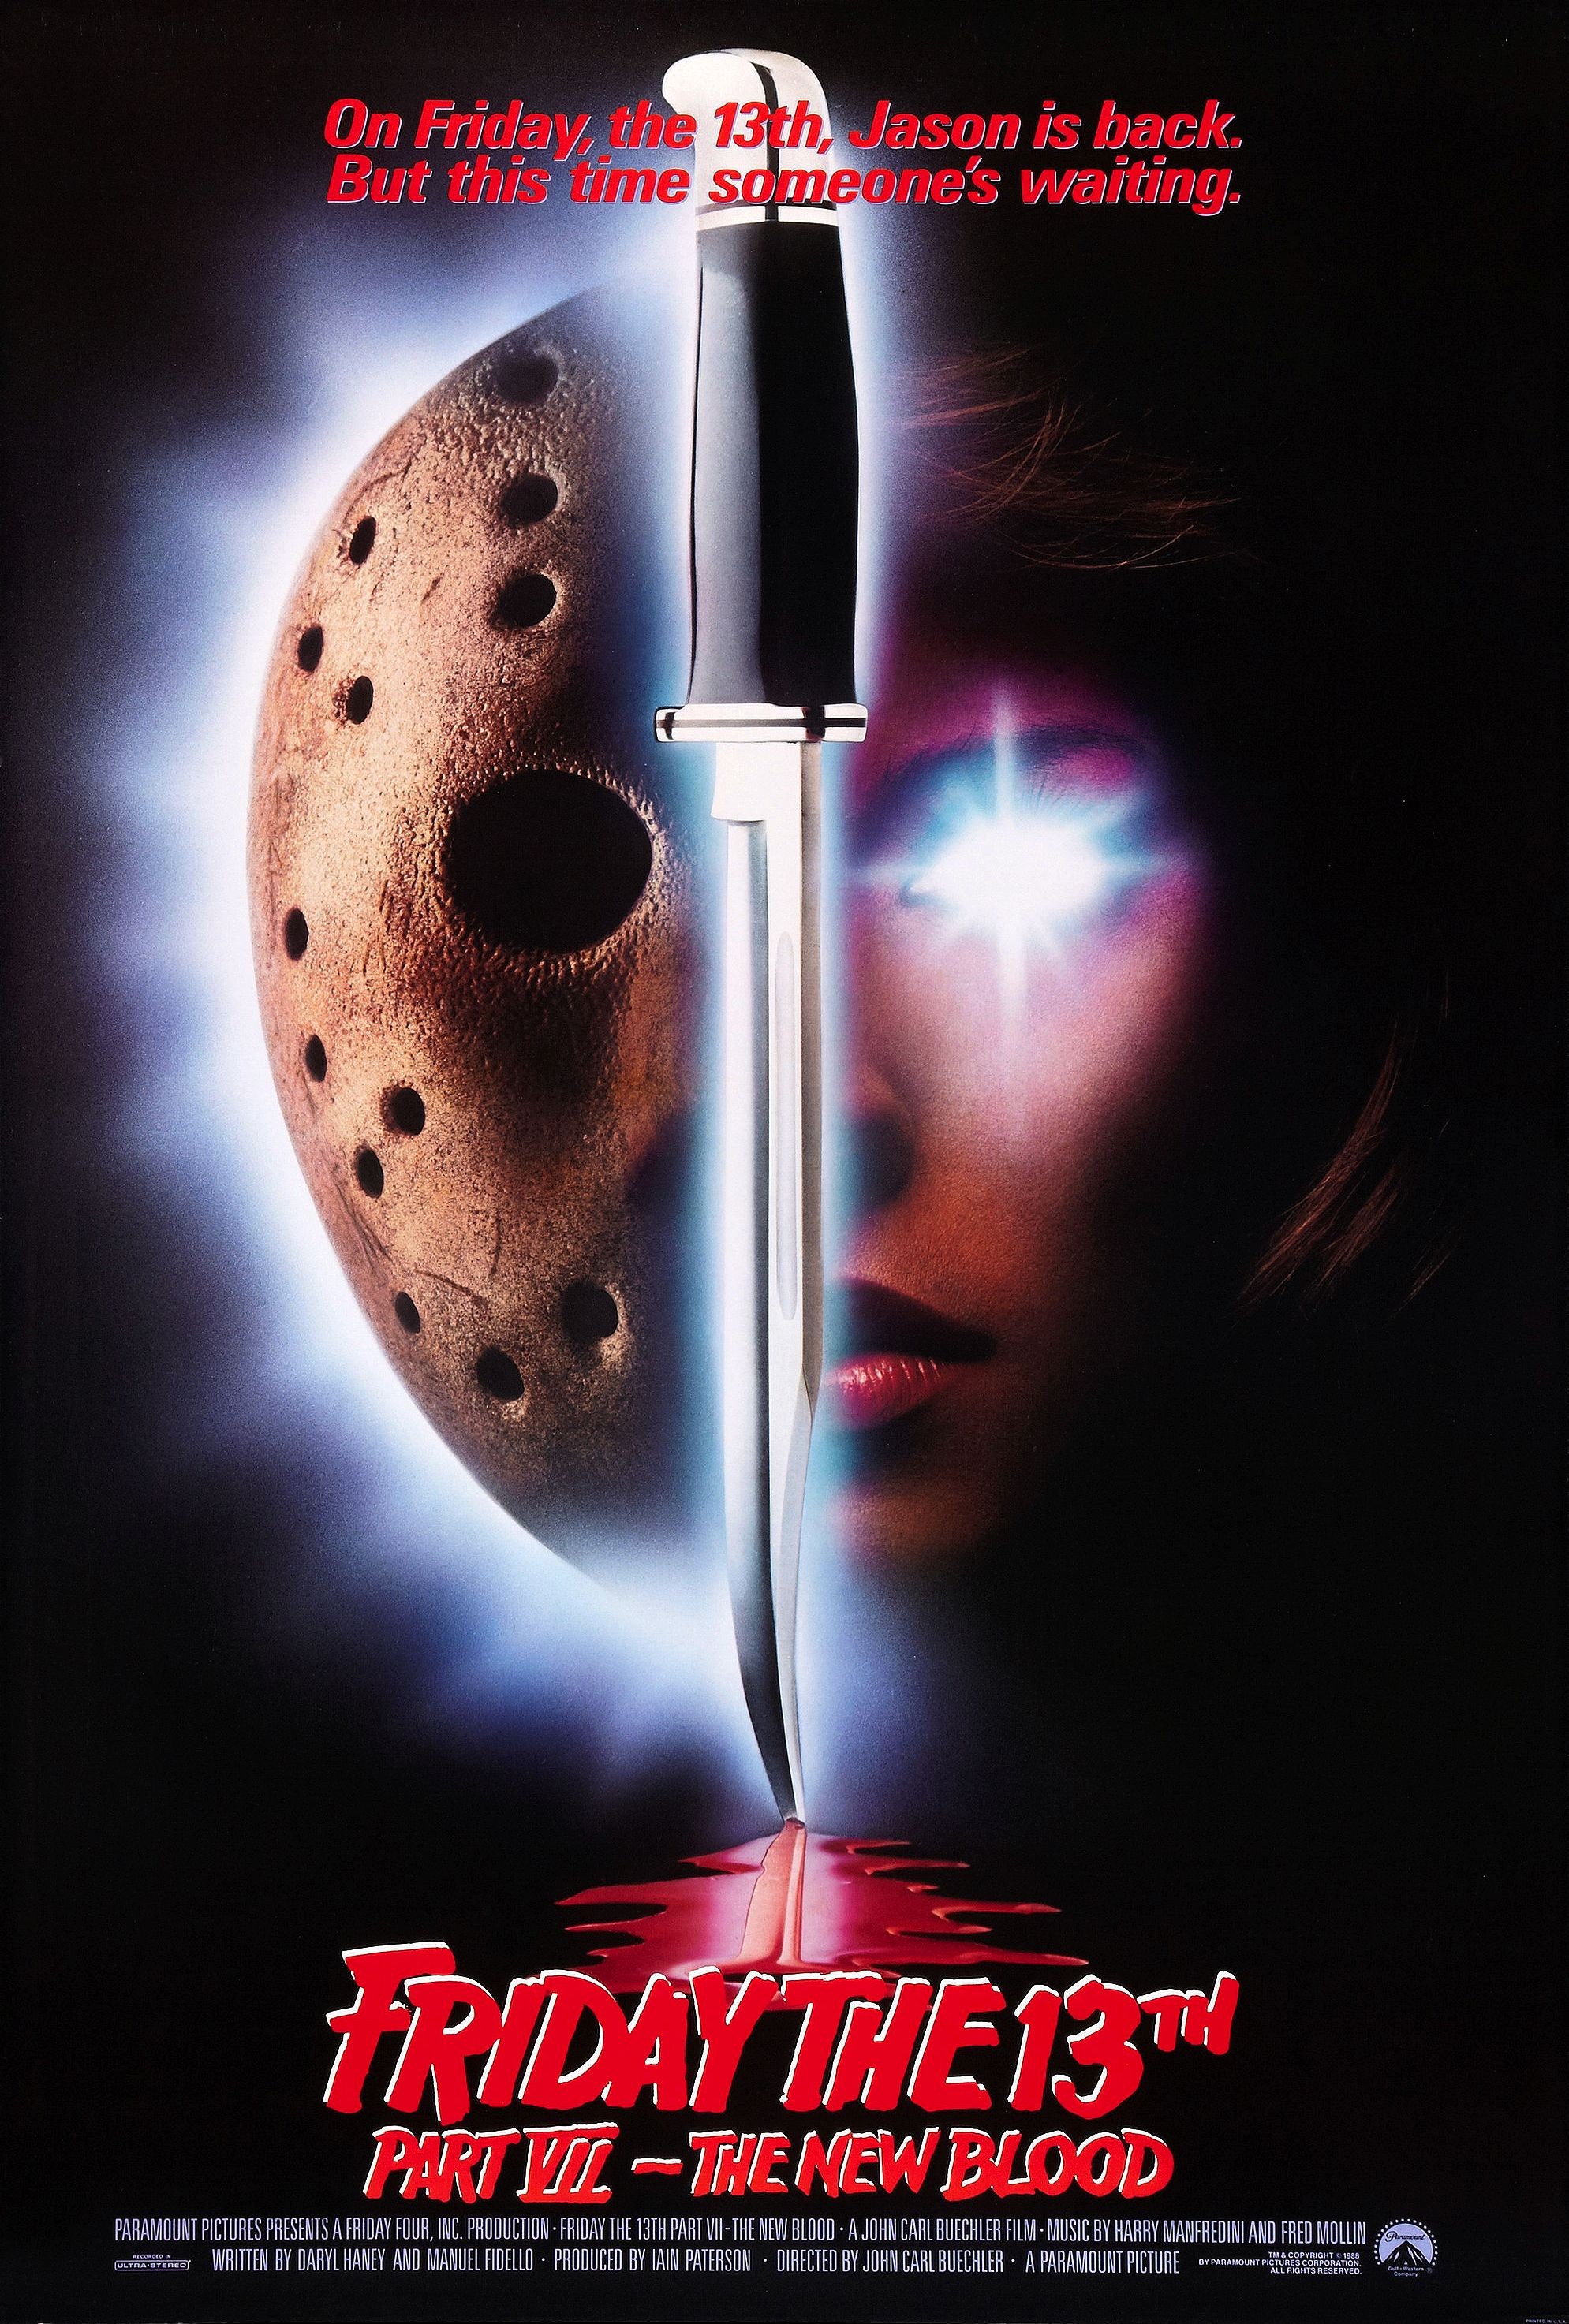 Friday The 13th Wallpaper